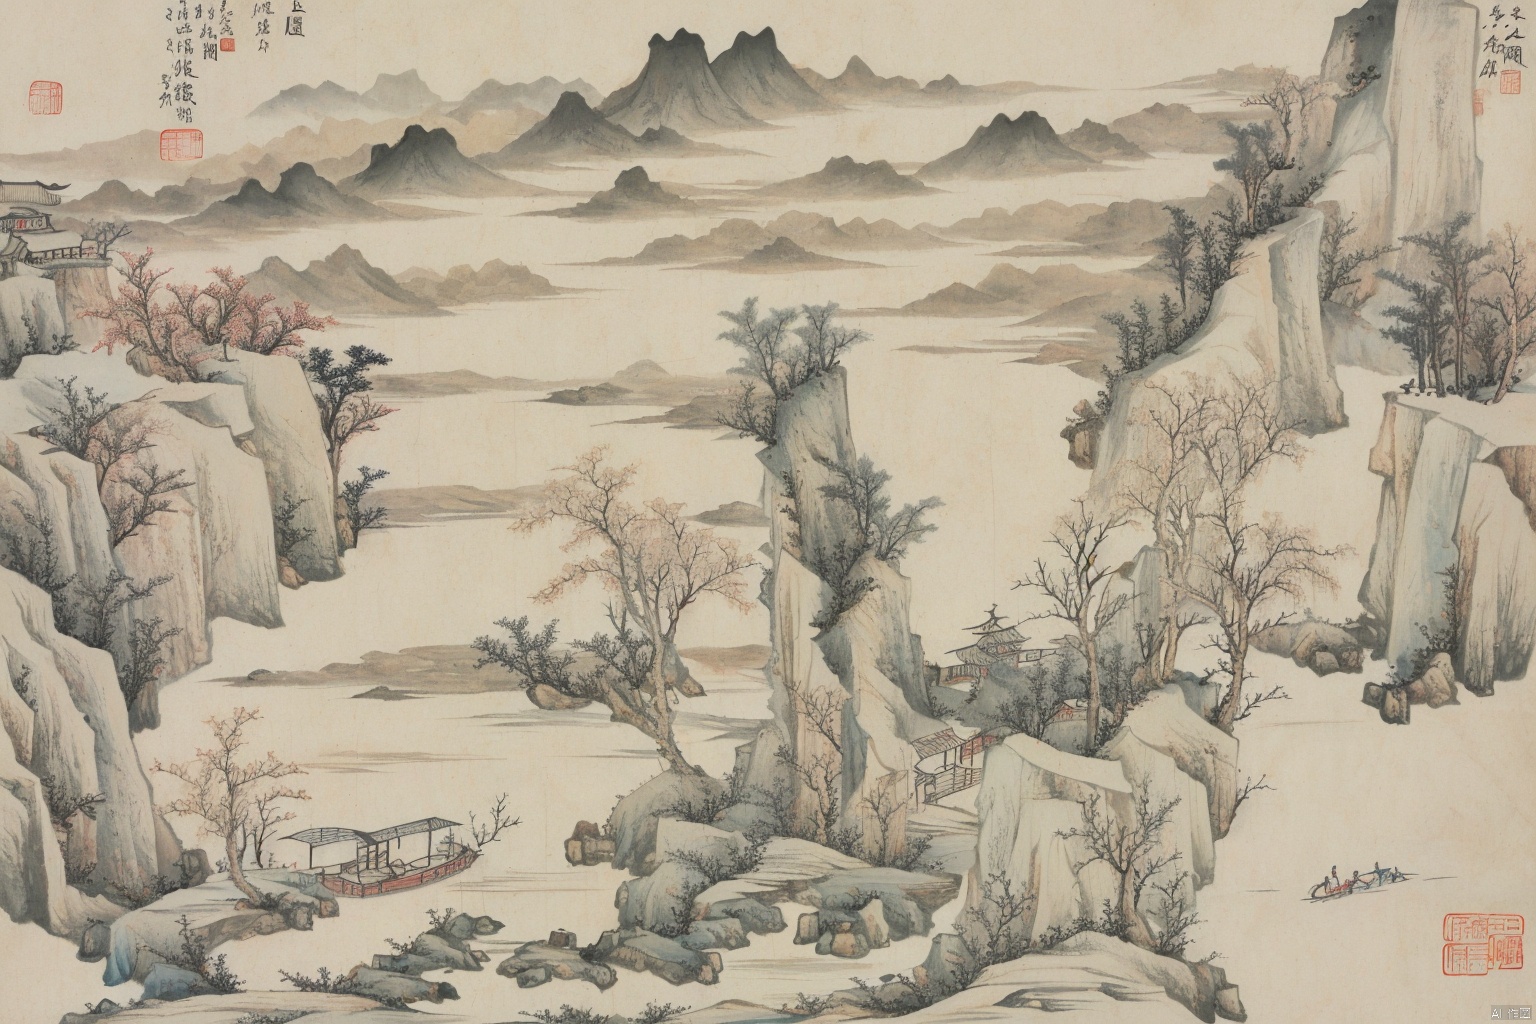 Chinese style ink landscape painting, trees, mountains, rivers, huts, boats, gf